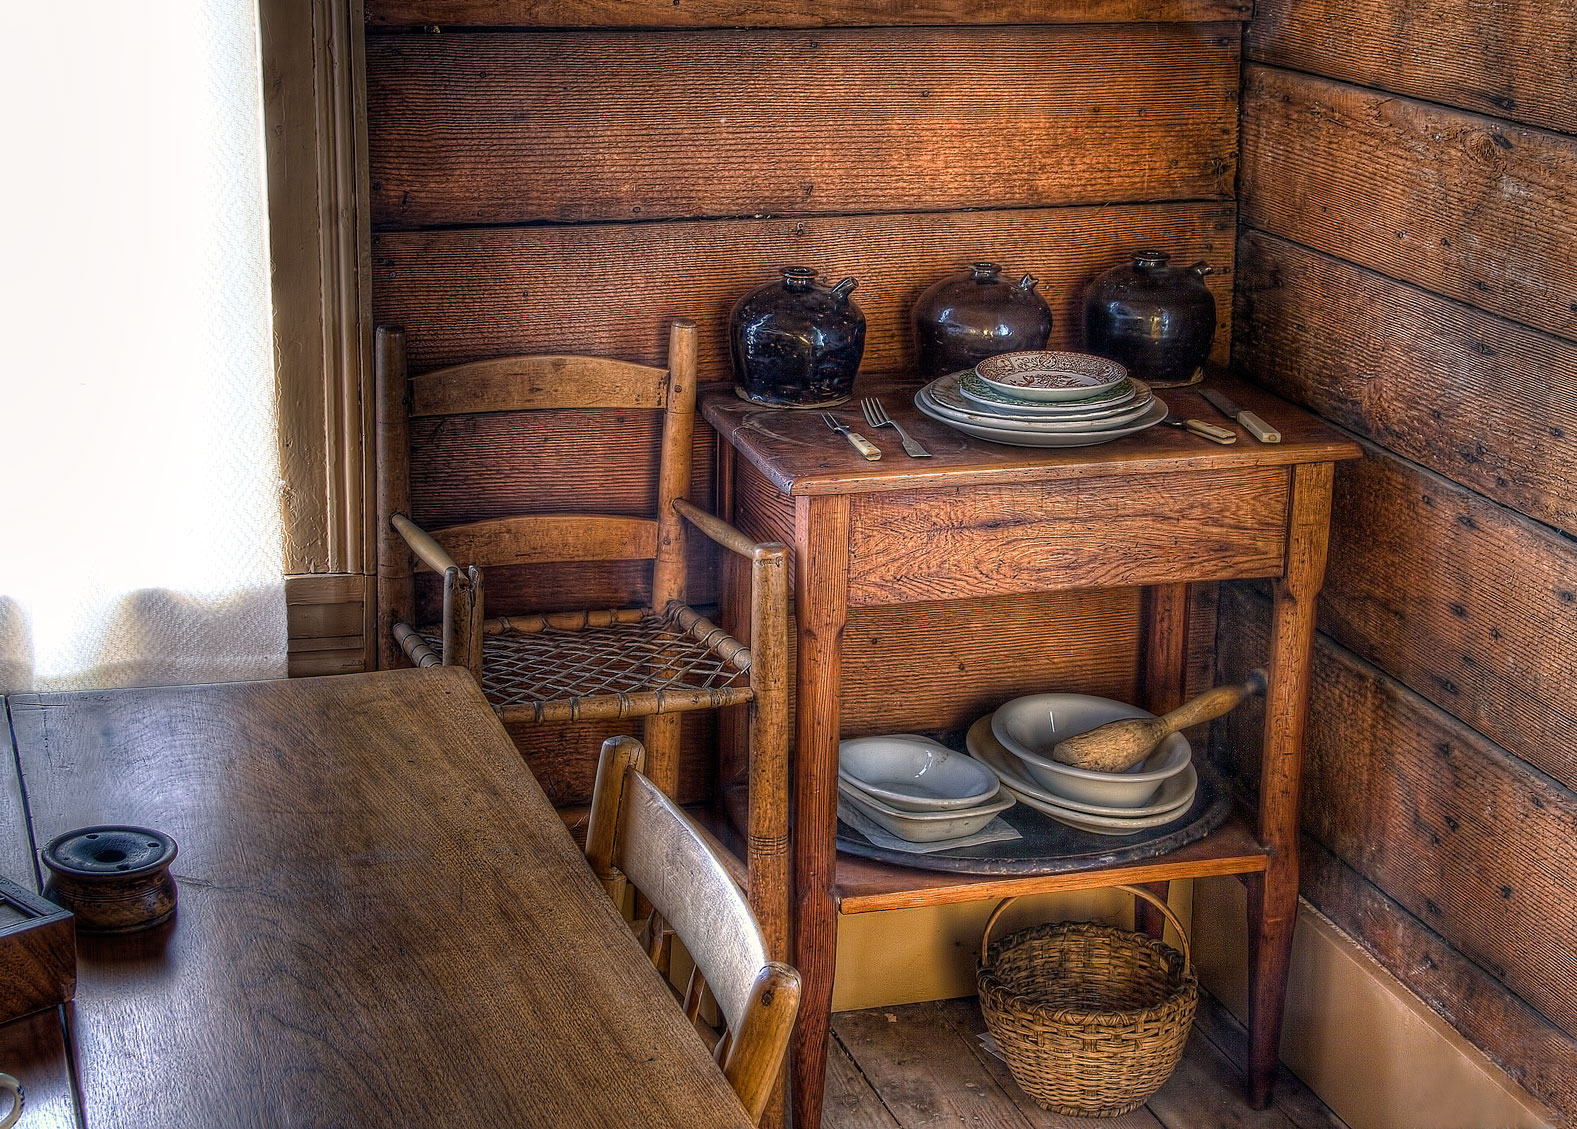 a chair, table and dishes on a table in a cabin